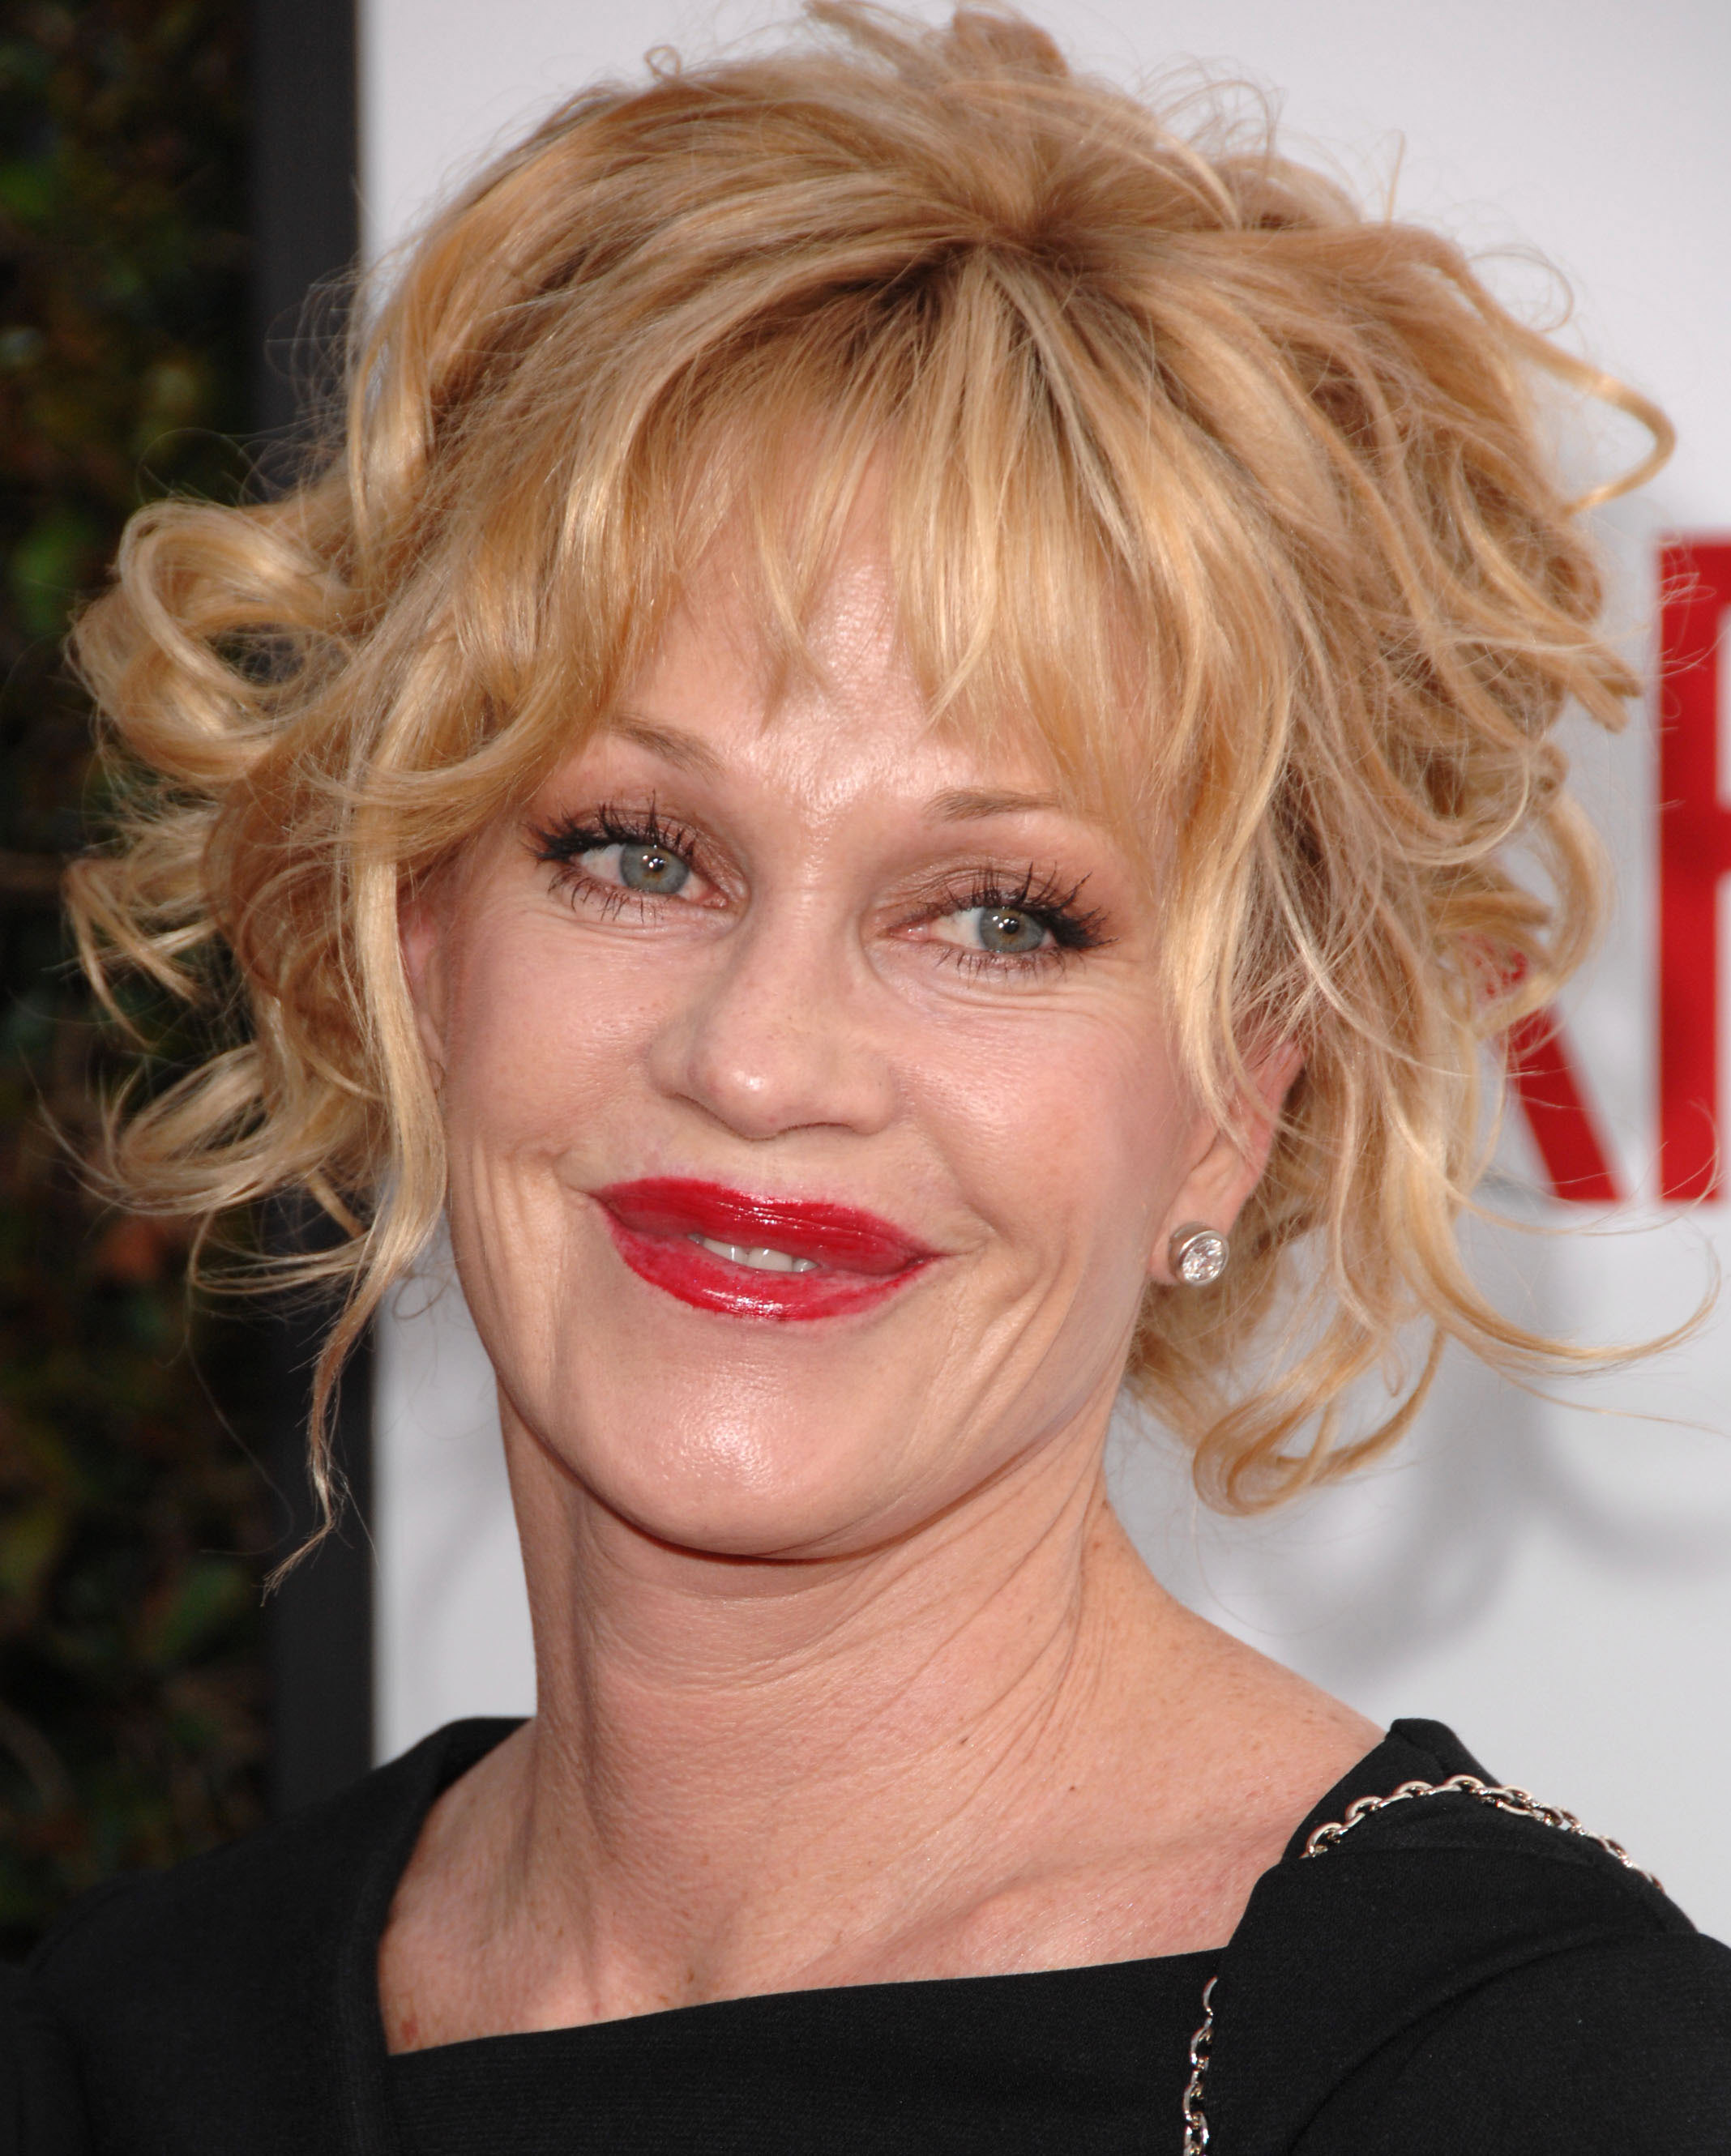 Melanie Griffith arrives at the 37th Annual AFI Lifetime Achievement Awards in Culver City, California, on June 11, 2009. | Source: Getty Images